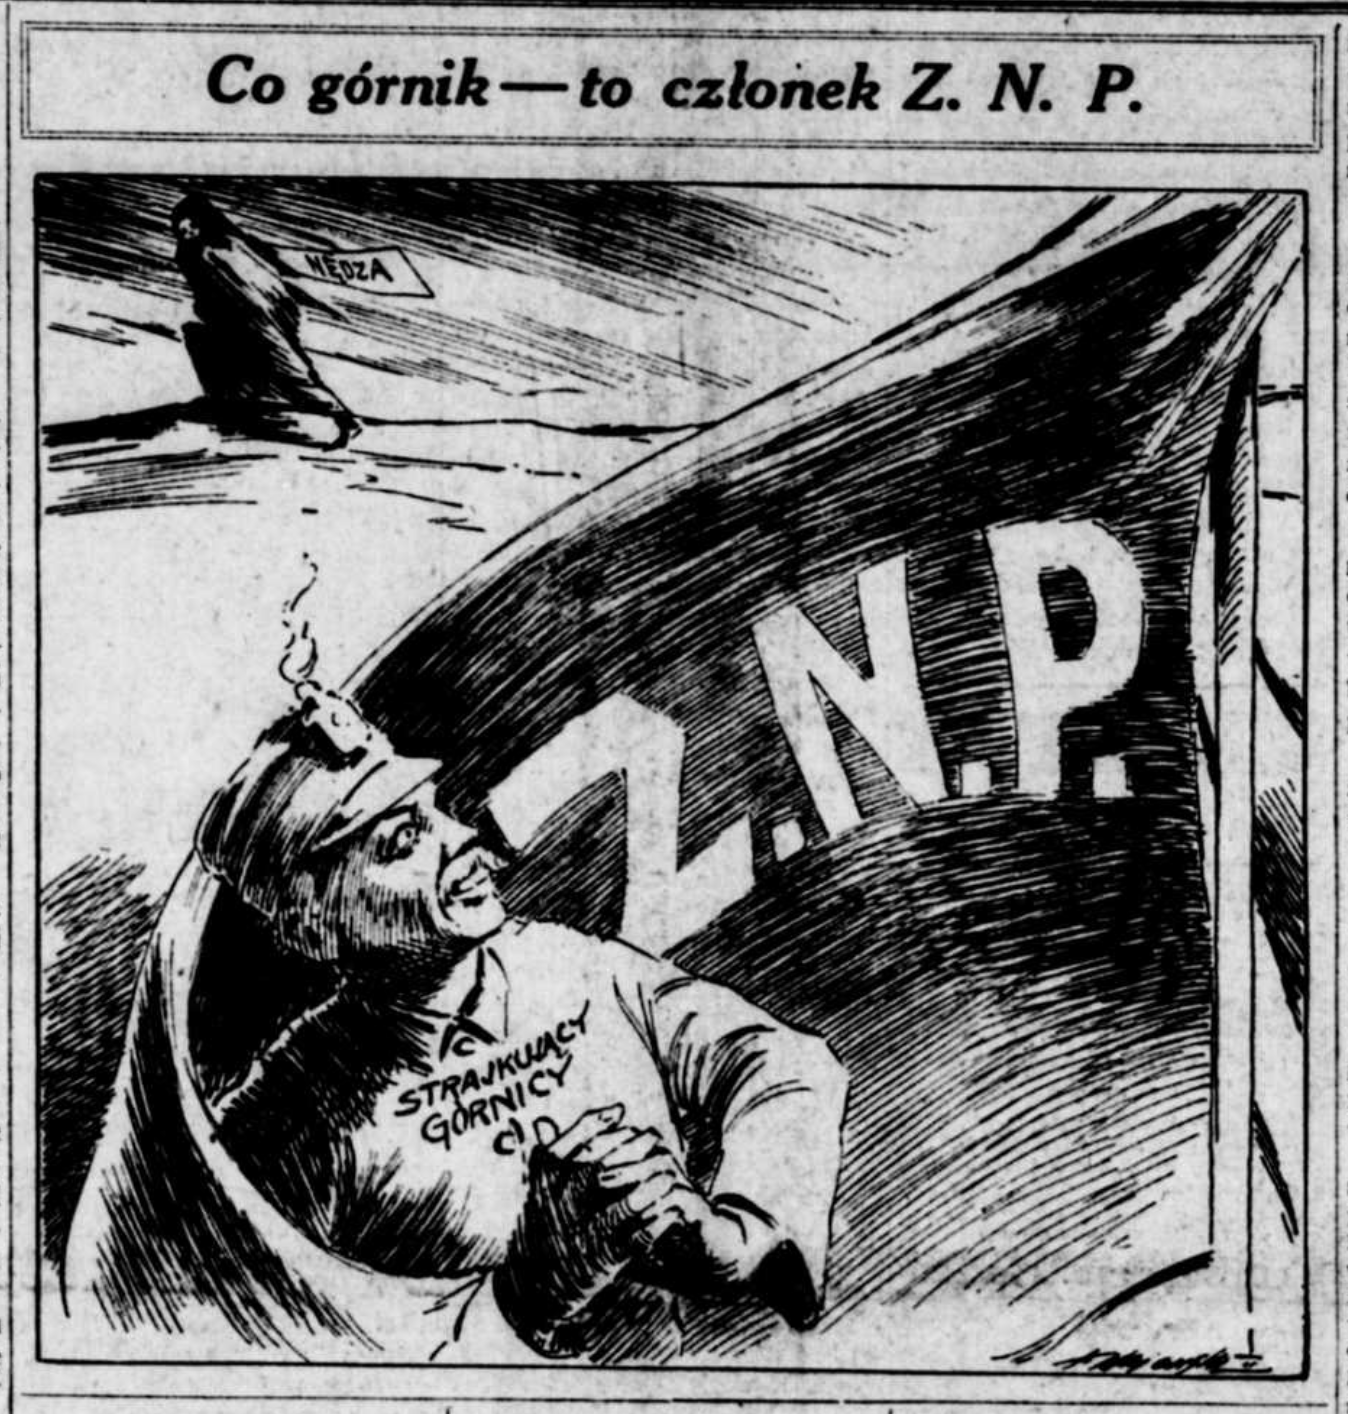 An illustration in the November 2, 1922 issue of Zgoda, with a heading reading "All miners are members of the Z.N.P.", or the Zwiazek Narodowo Polski ("Polish National Alliance").